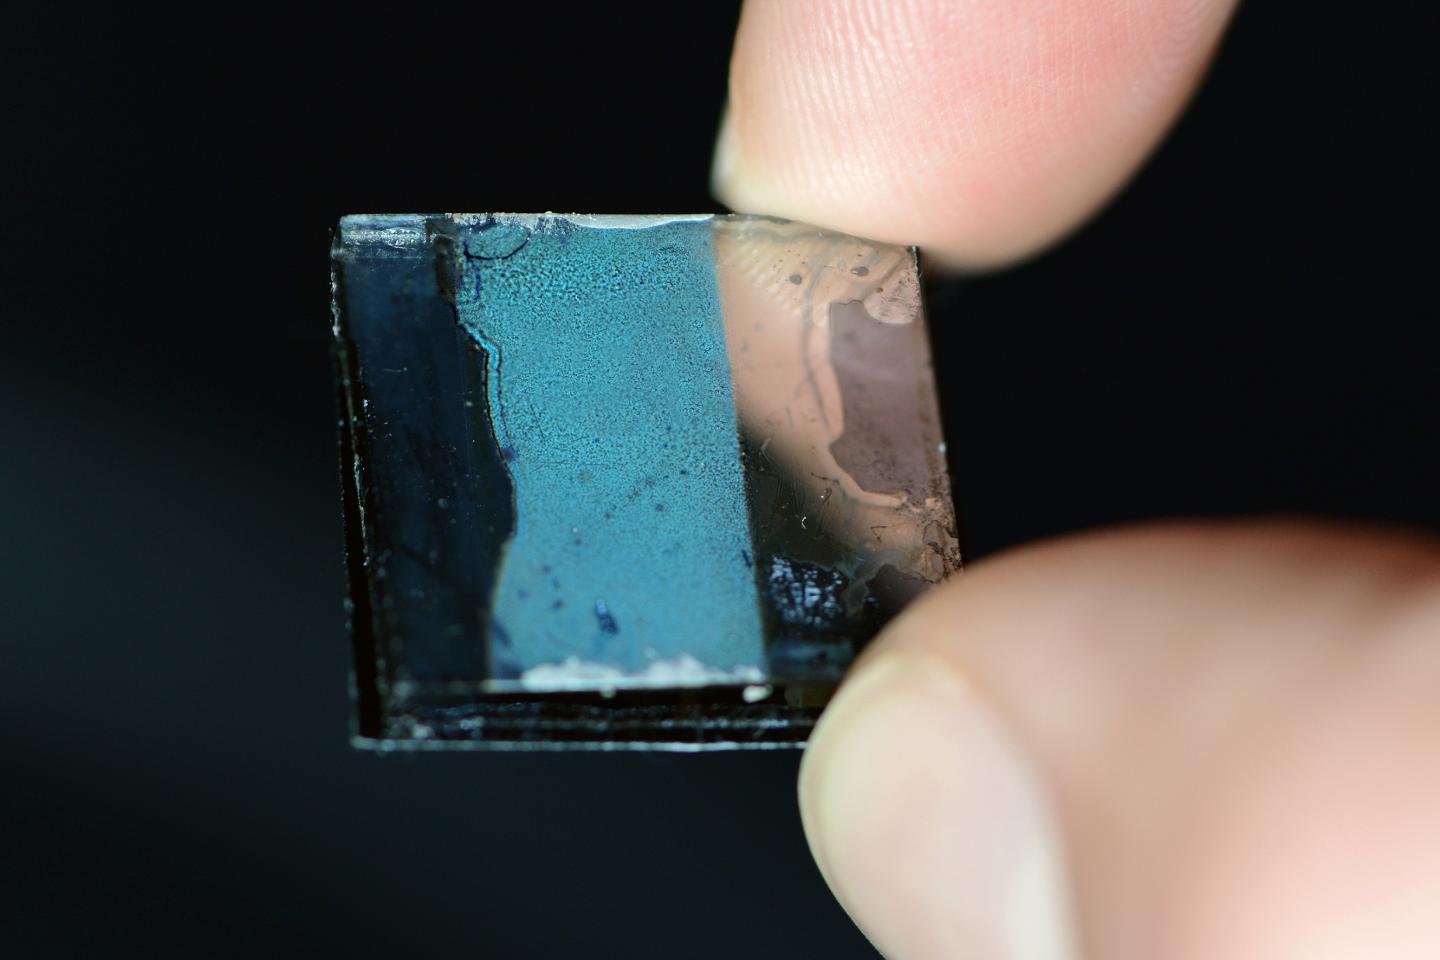 Blue Opalescence of a Highly Poprous Germanium Nanofilm